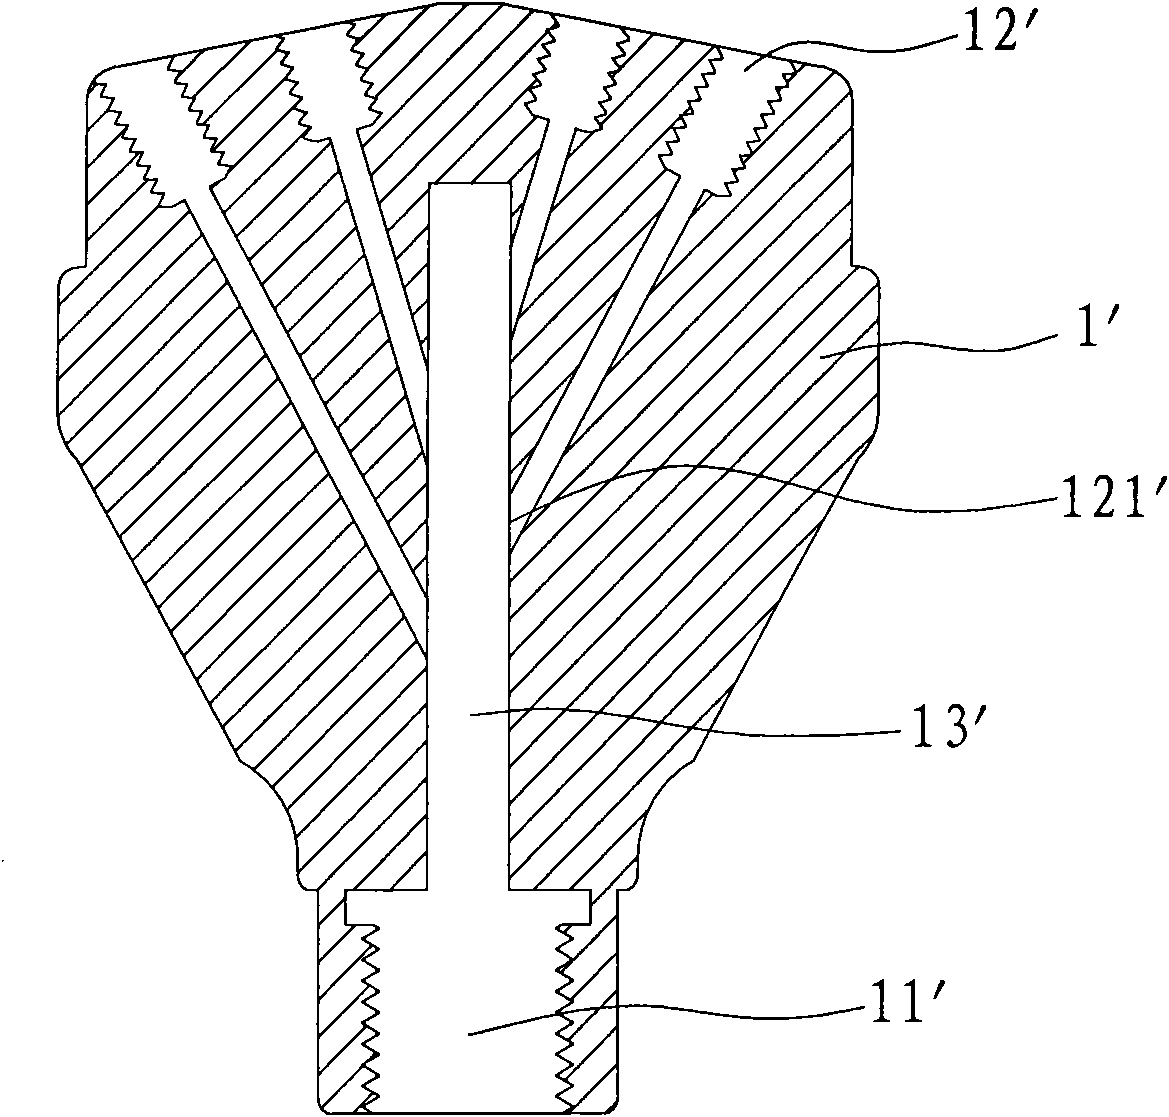 Structure of water jet blade